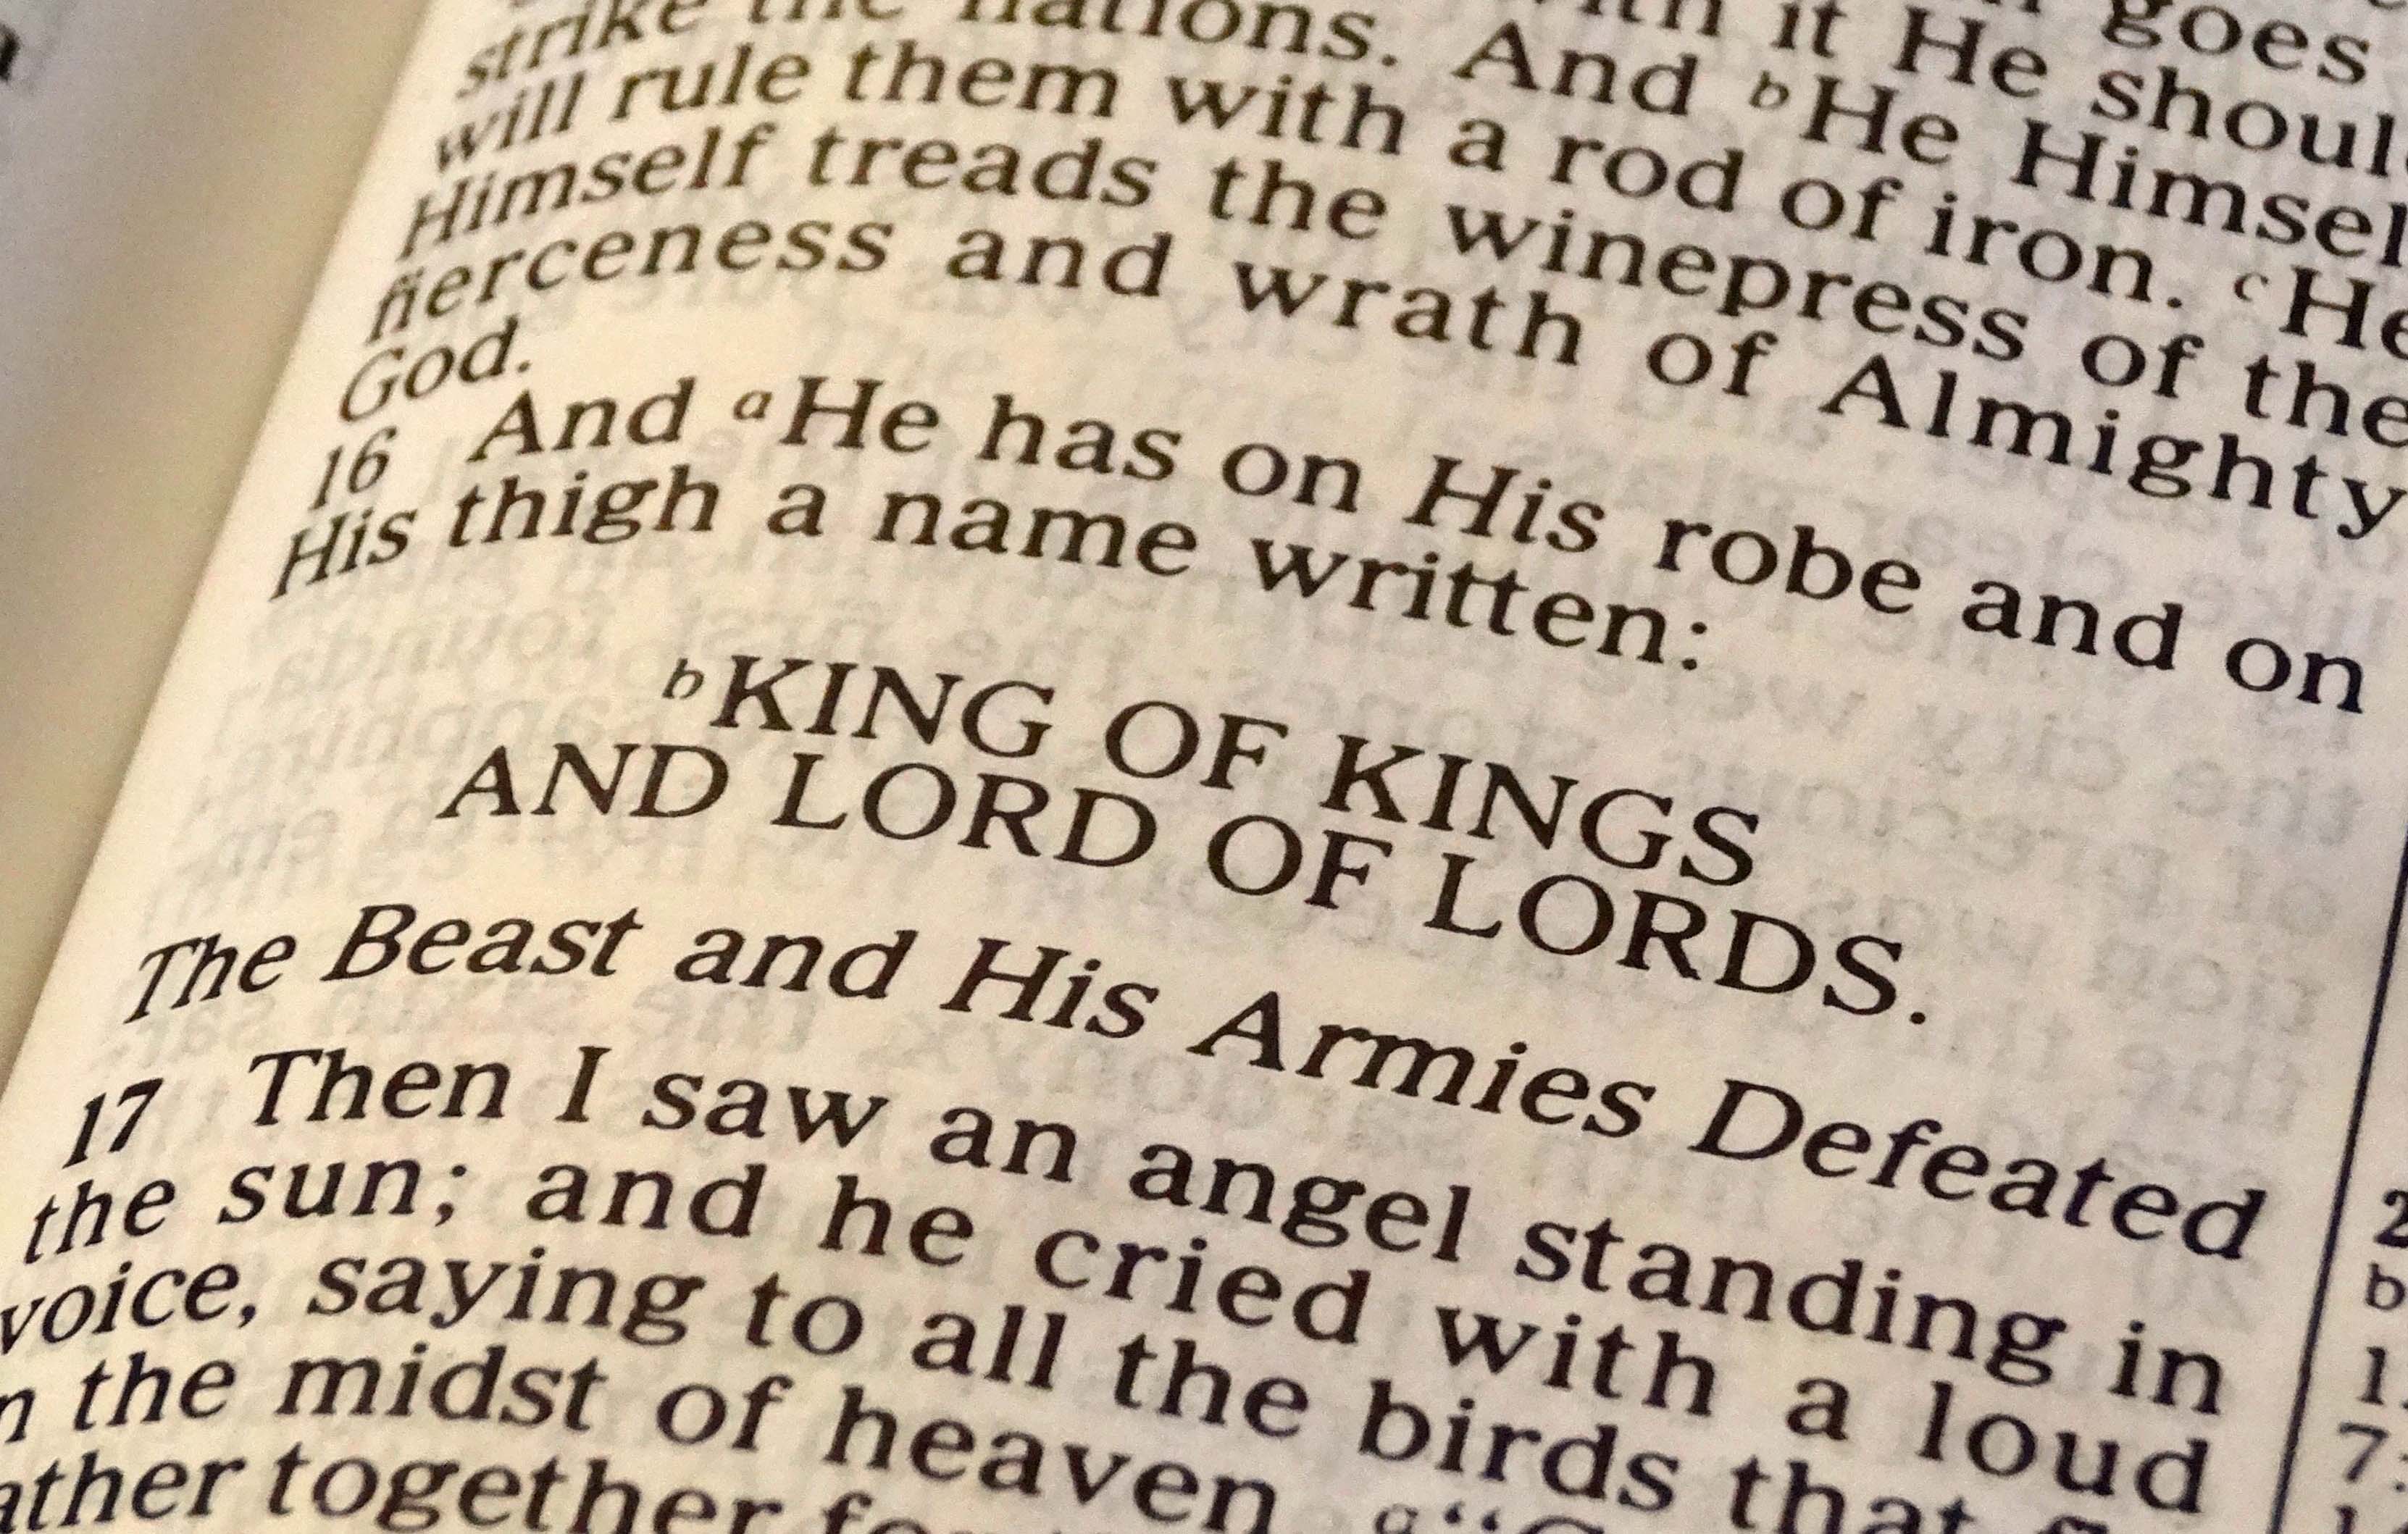 Christ as King and Lord